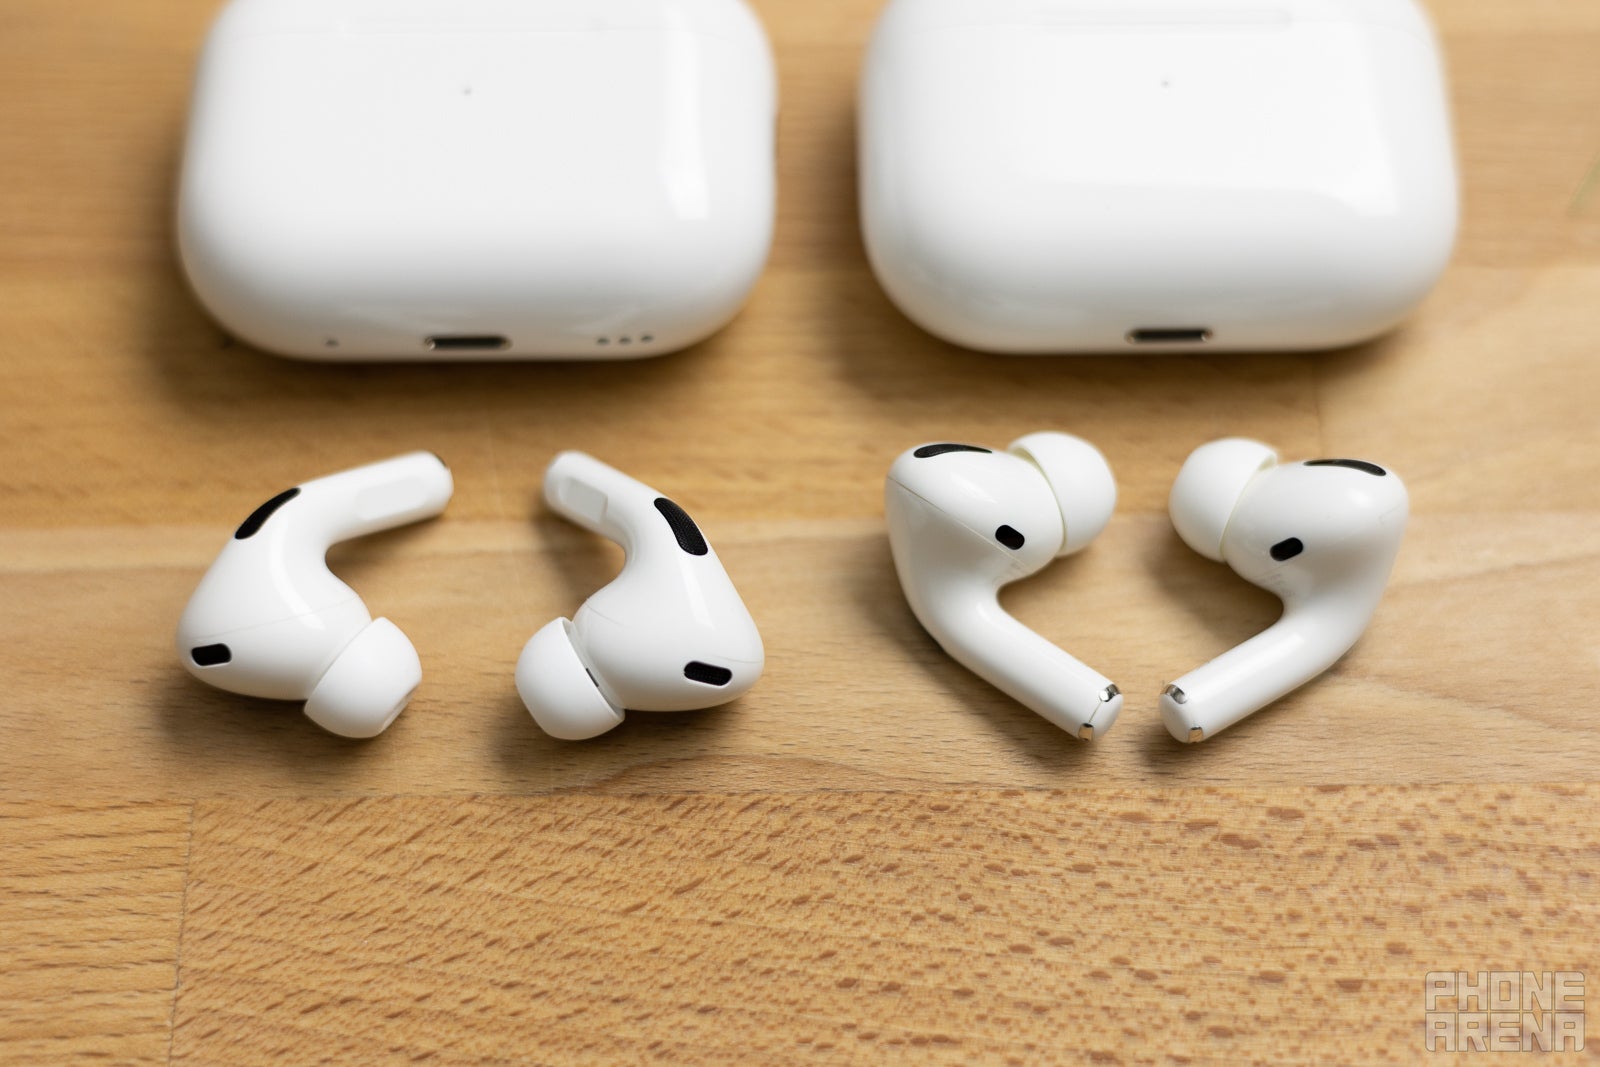 Google Pixel Buds Pro vs Apple AirPods Pro 2: what are the differences?